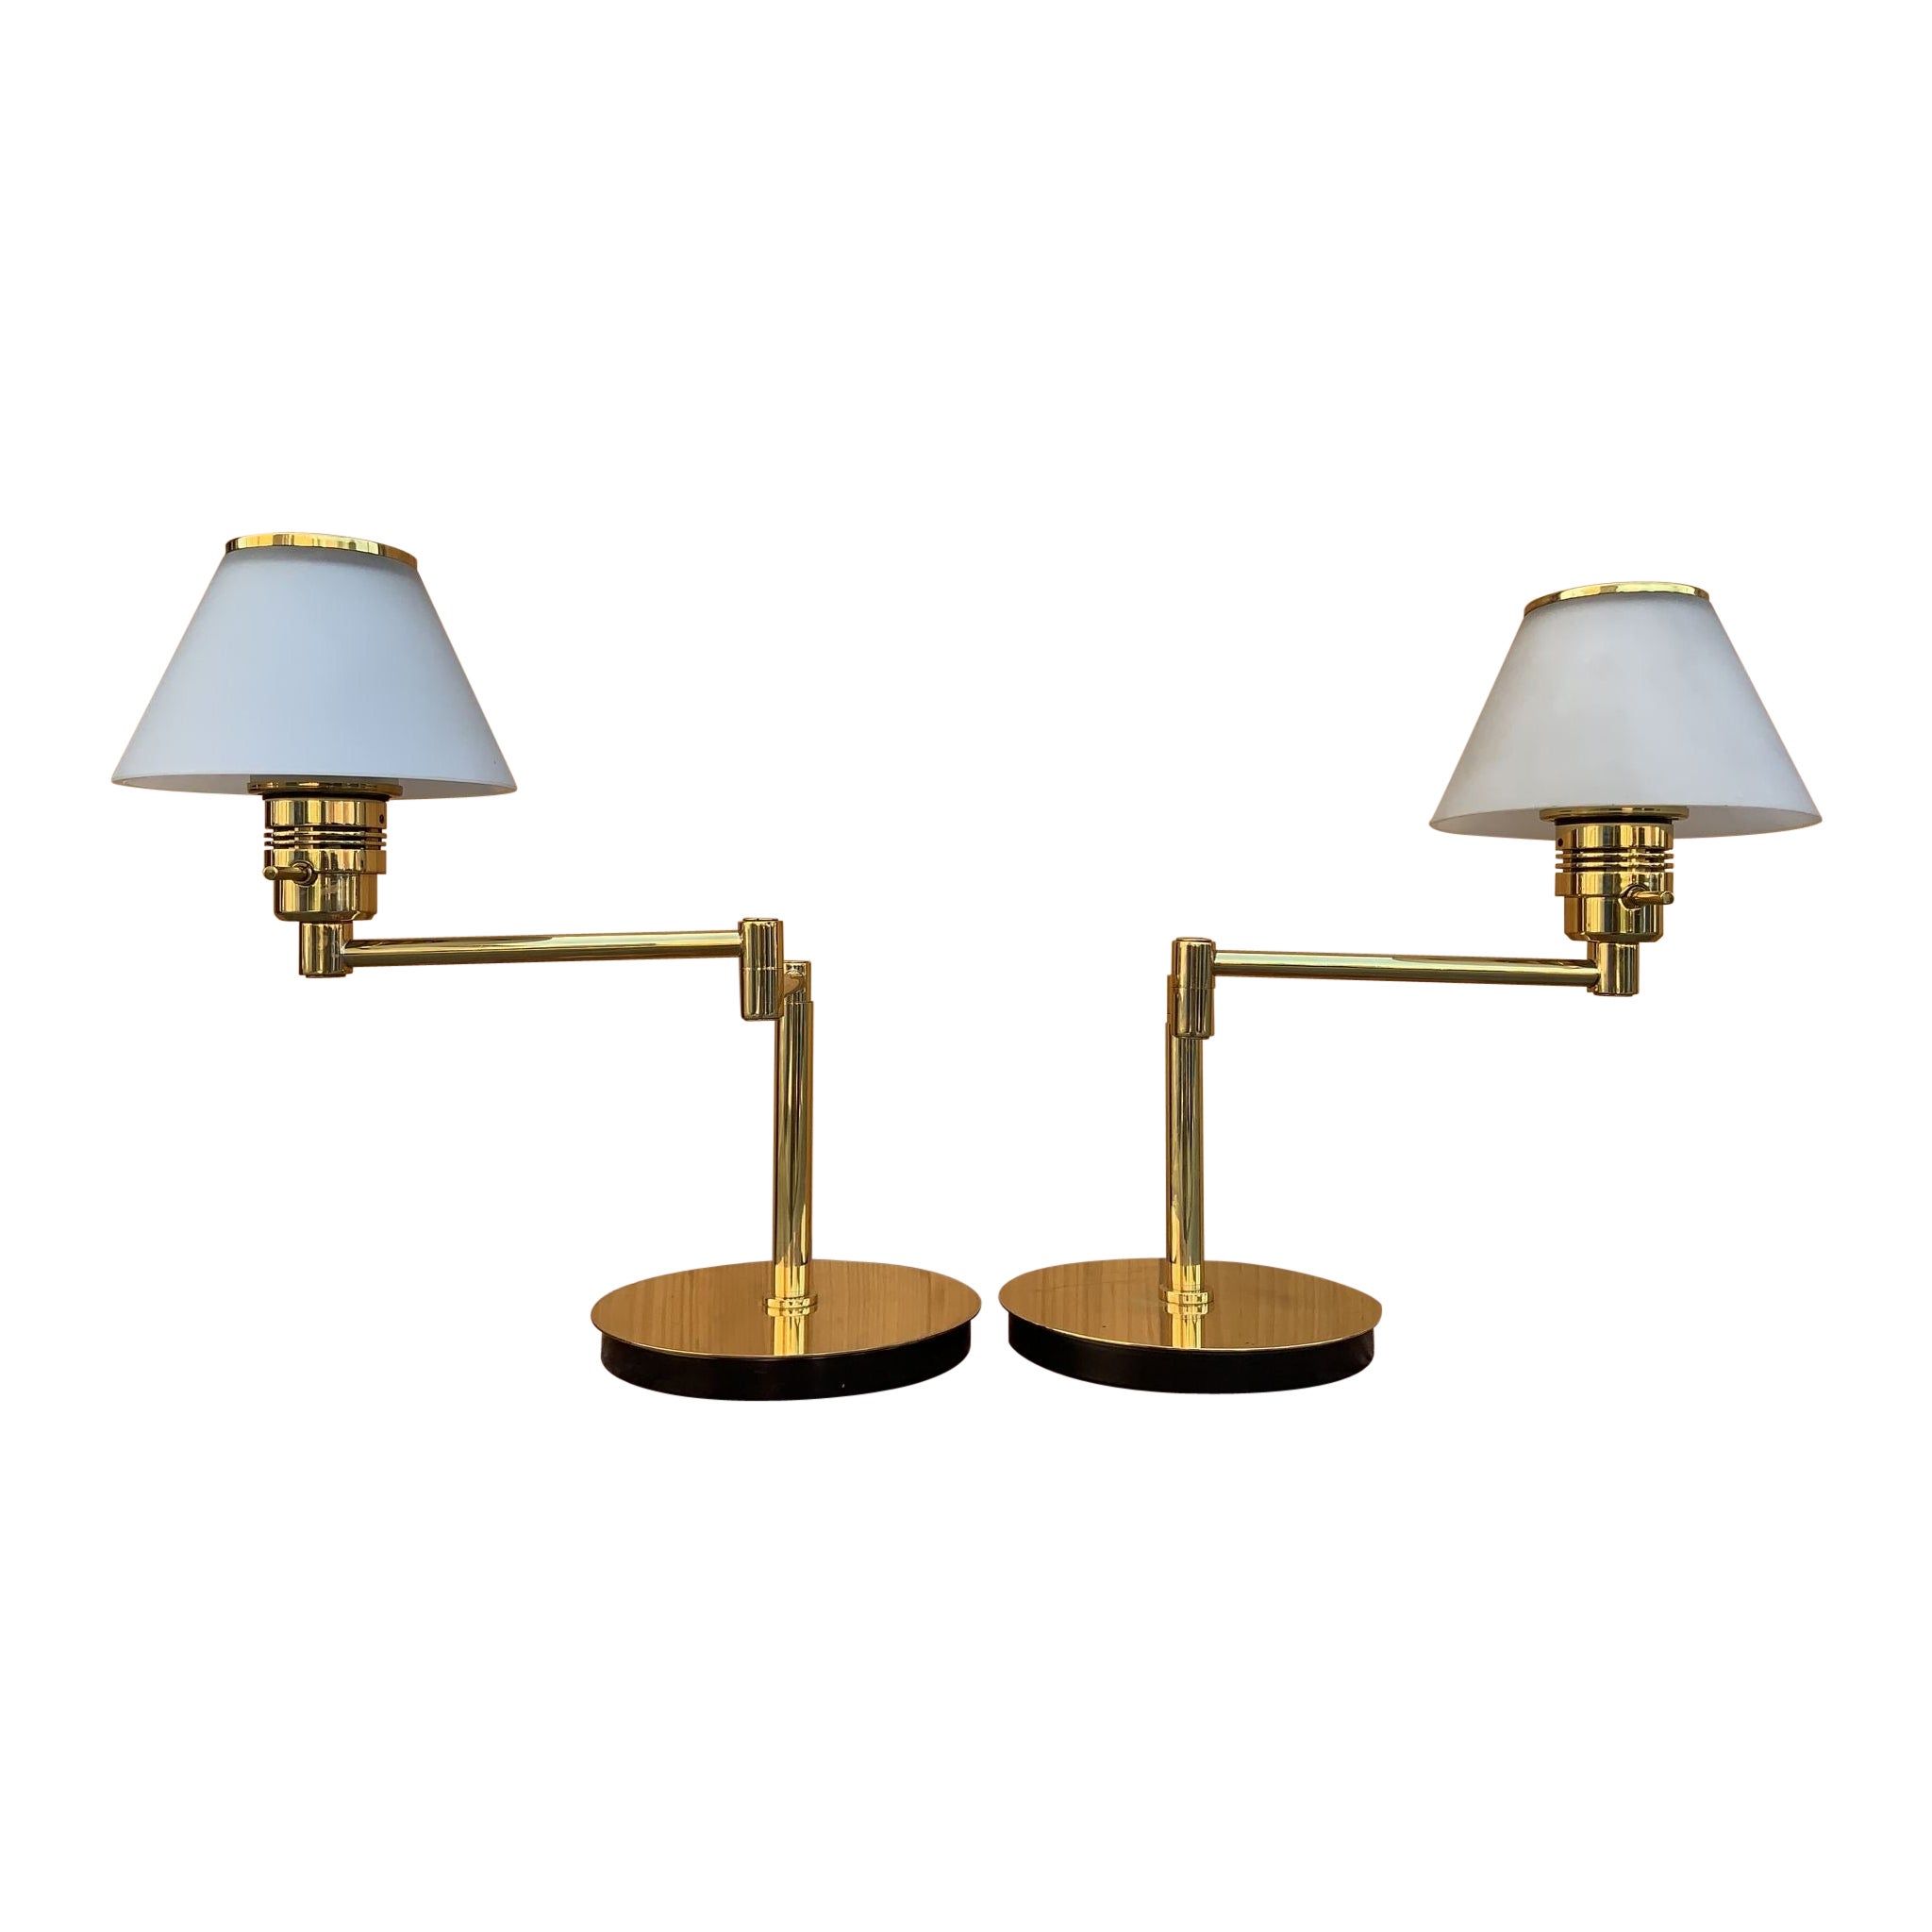 Vintage Modern Brass Swing Arm Reading Table Lamp with Glass Shades - Pair  For Sale